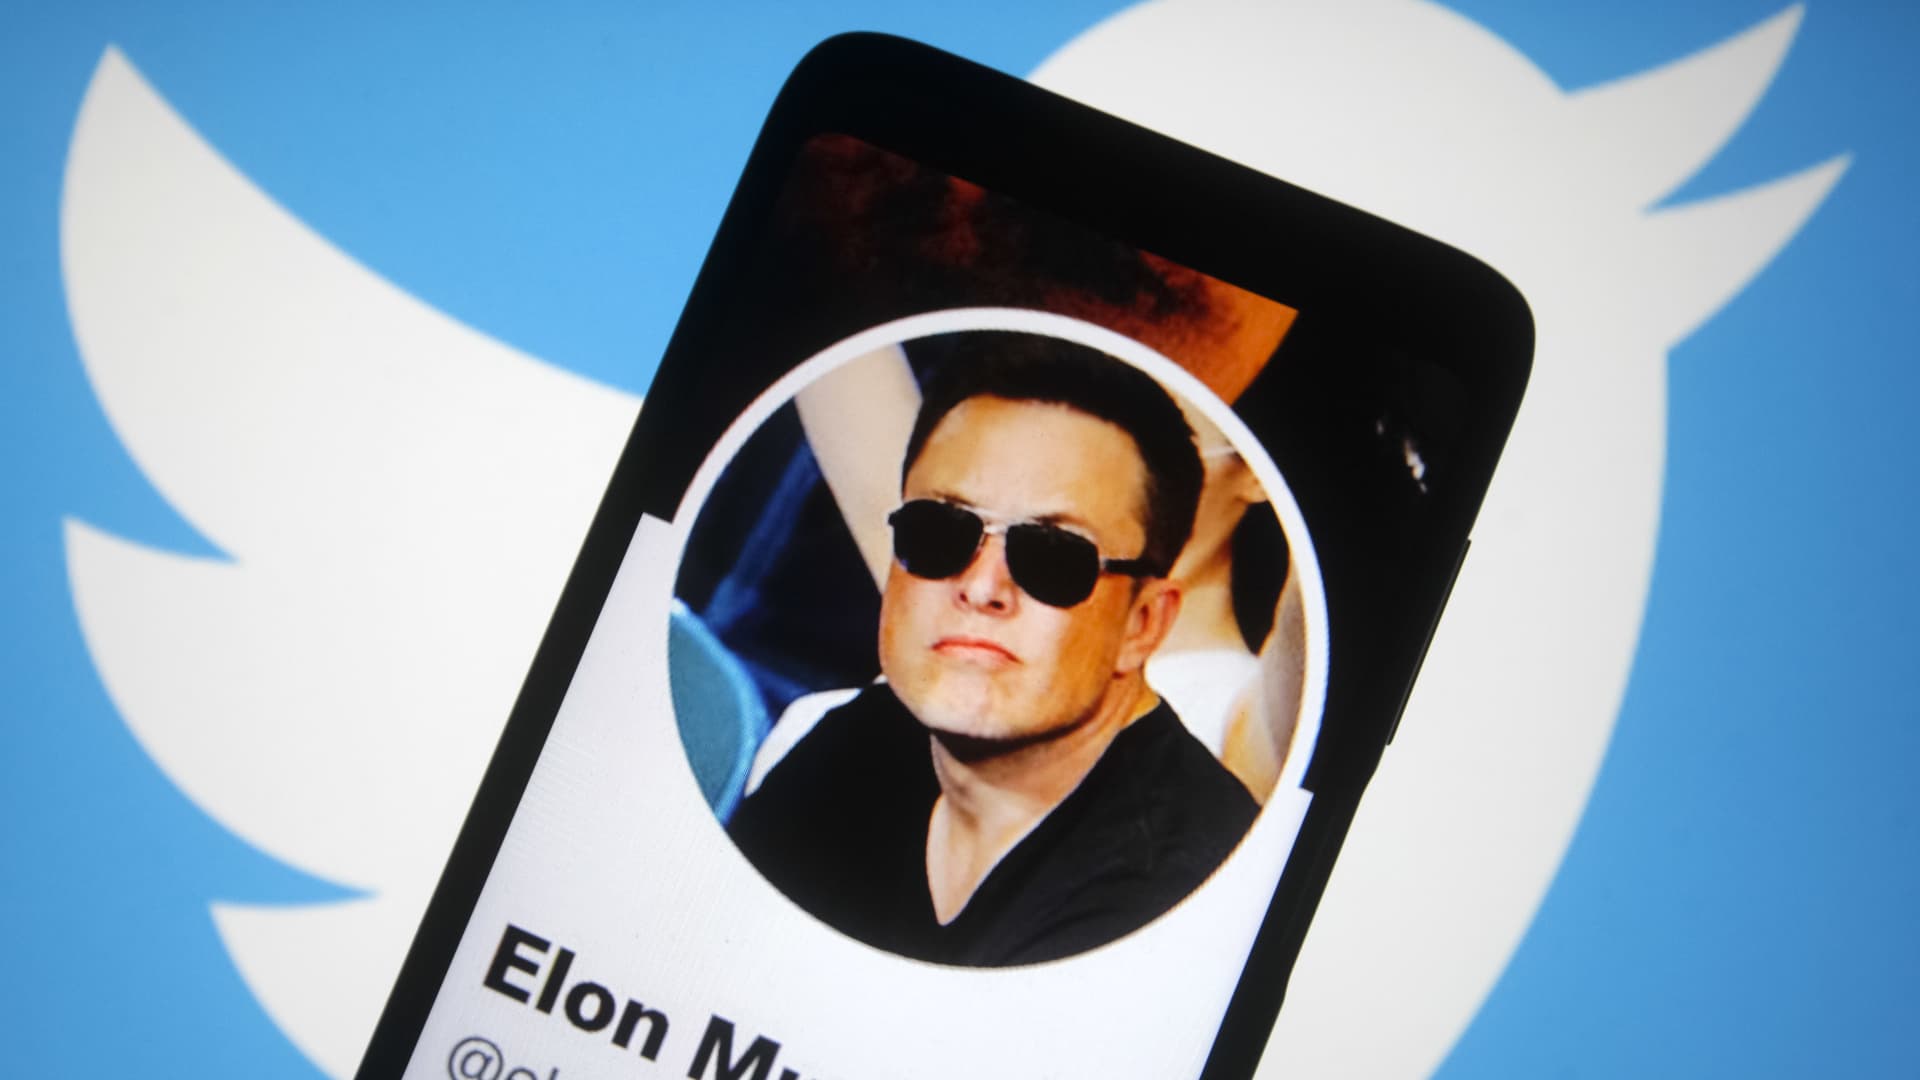 Elon Musk says 3 issues need to be resolved before his Twitter buyout can go ahead